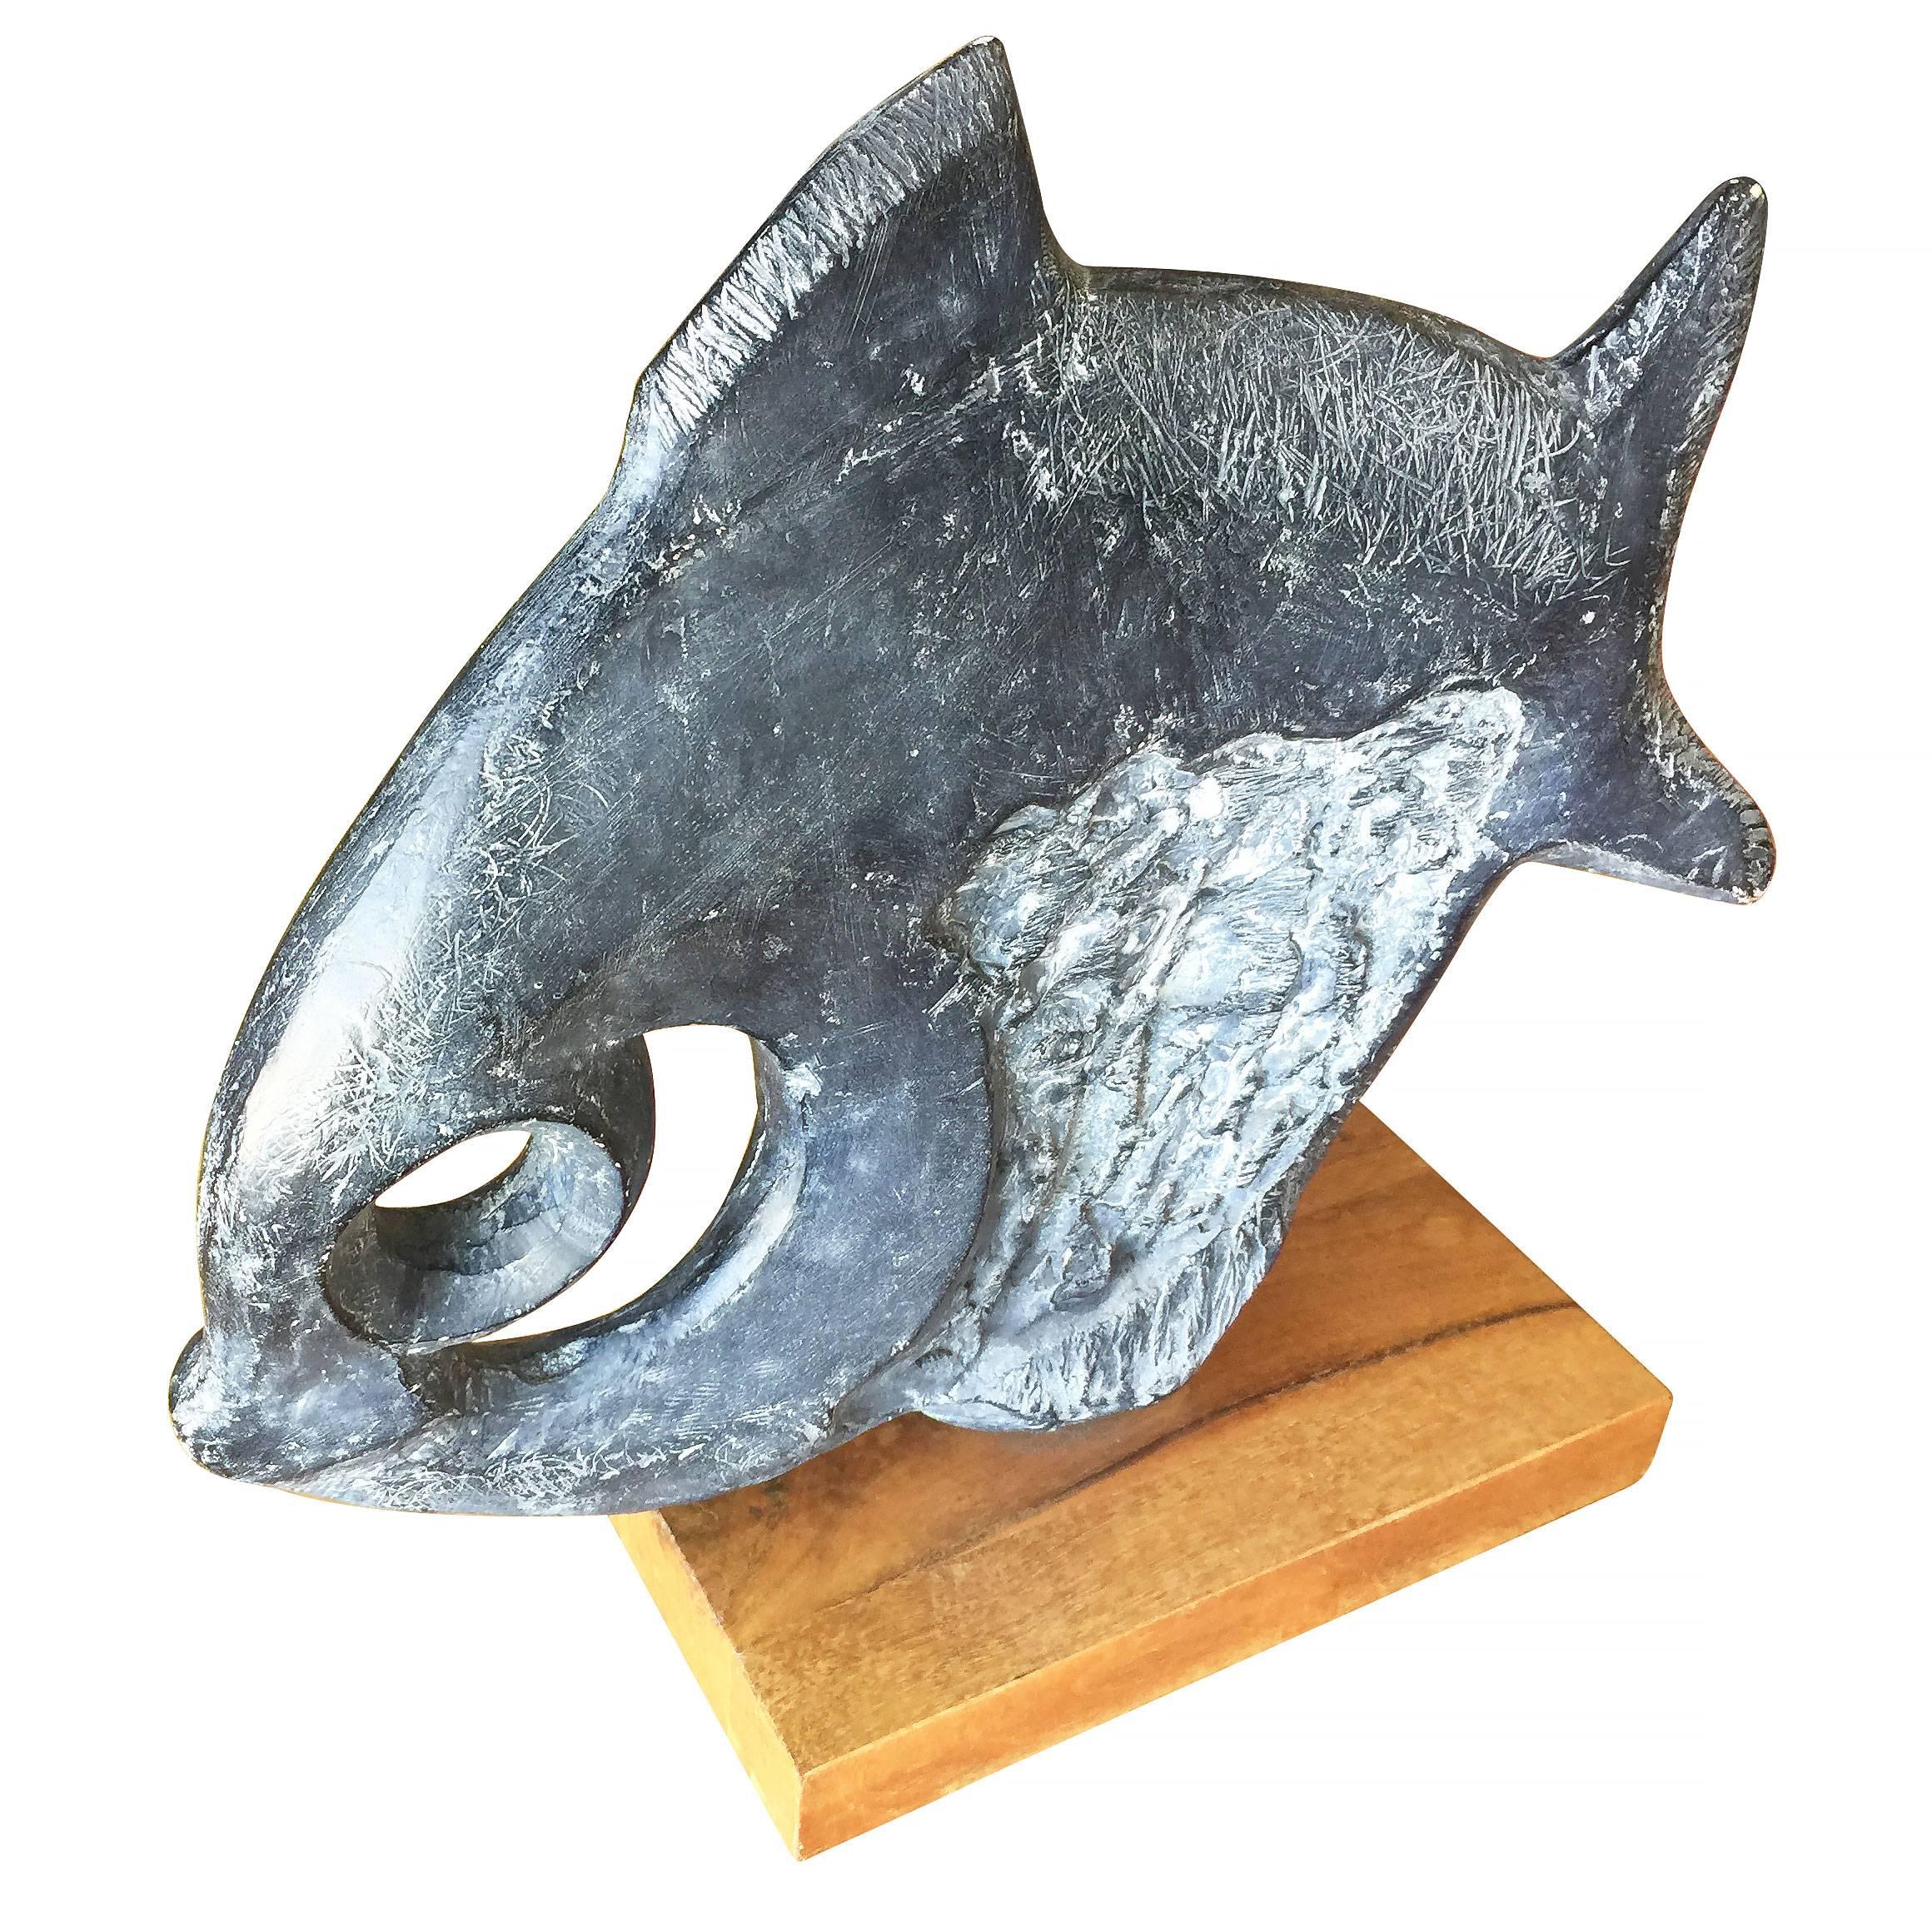 Modernist Austin Productions/Klara Sever black abstract fish sculpture featuring a clay sculpture fixed to a solid hardwood base.

Signed 